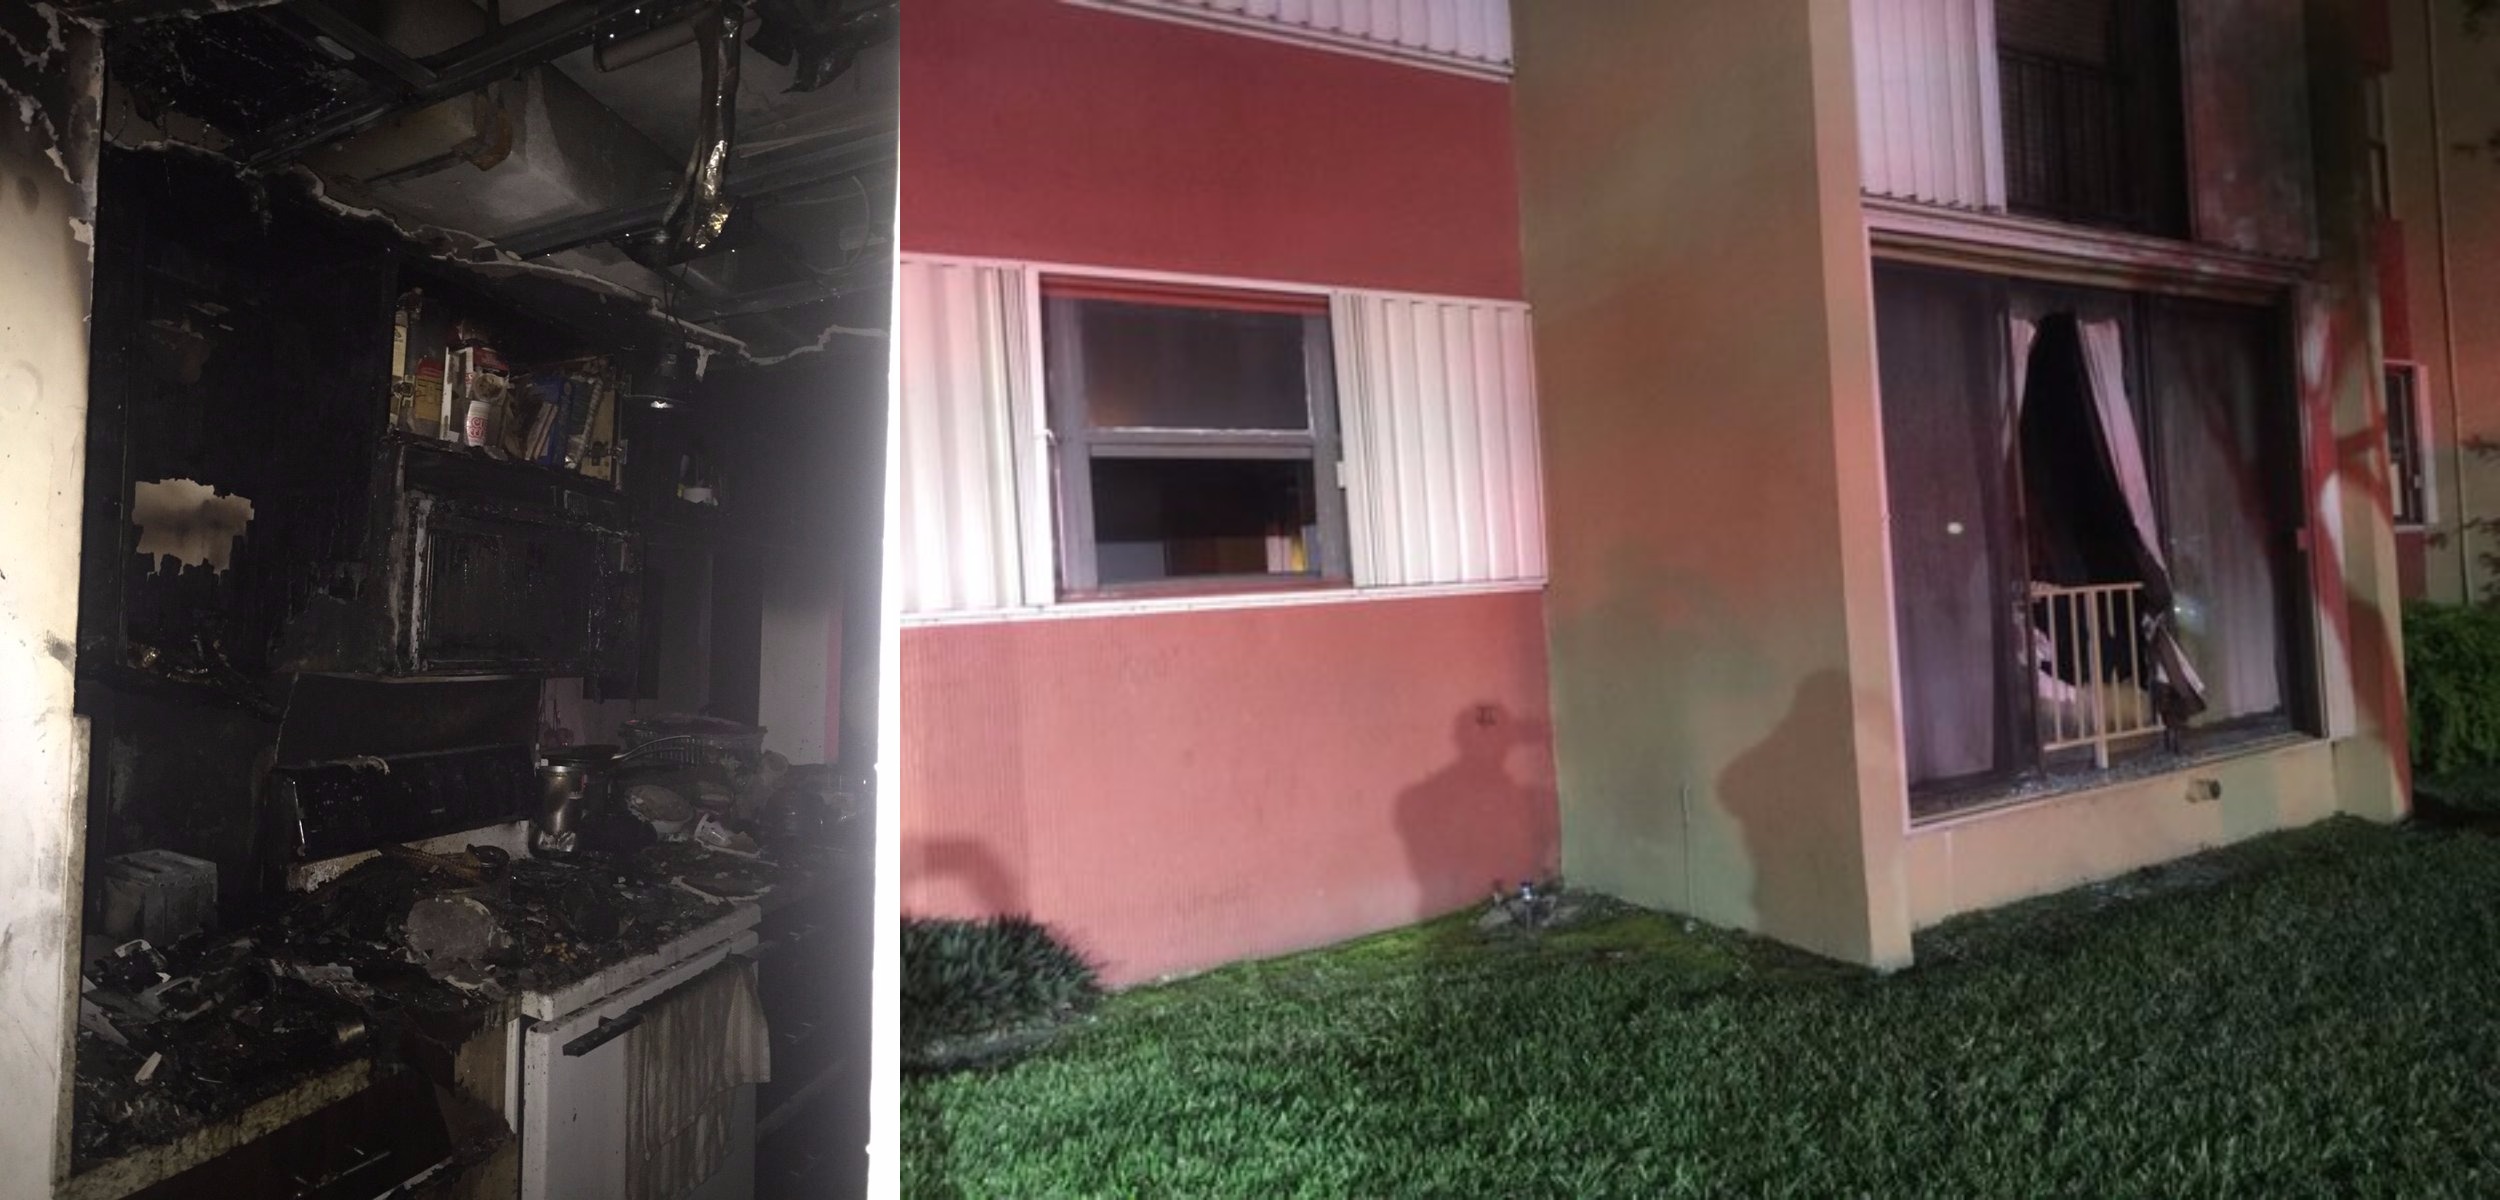 The damage done by the fire. (Miami-Dade Fire Rescue)